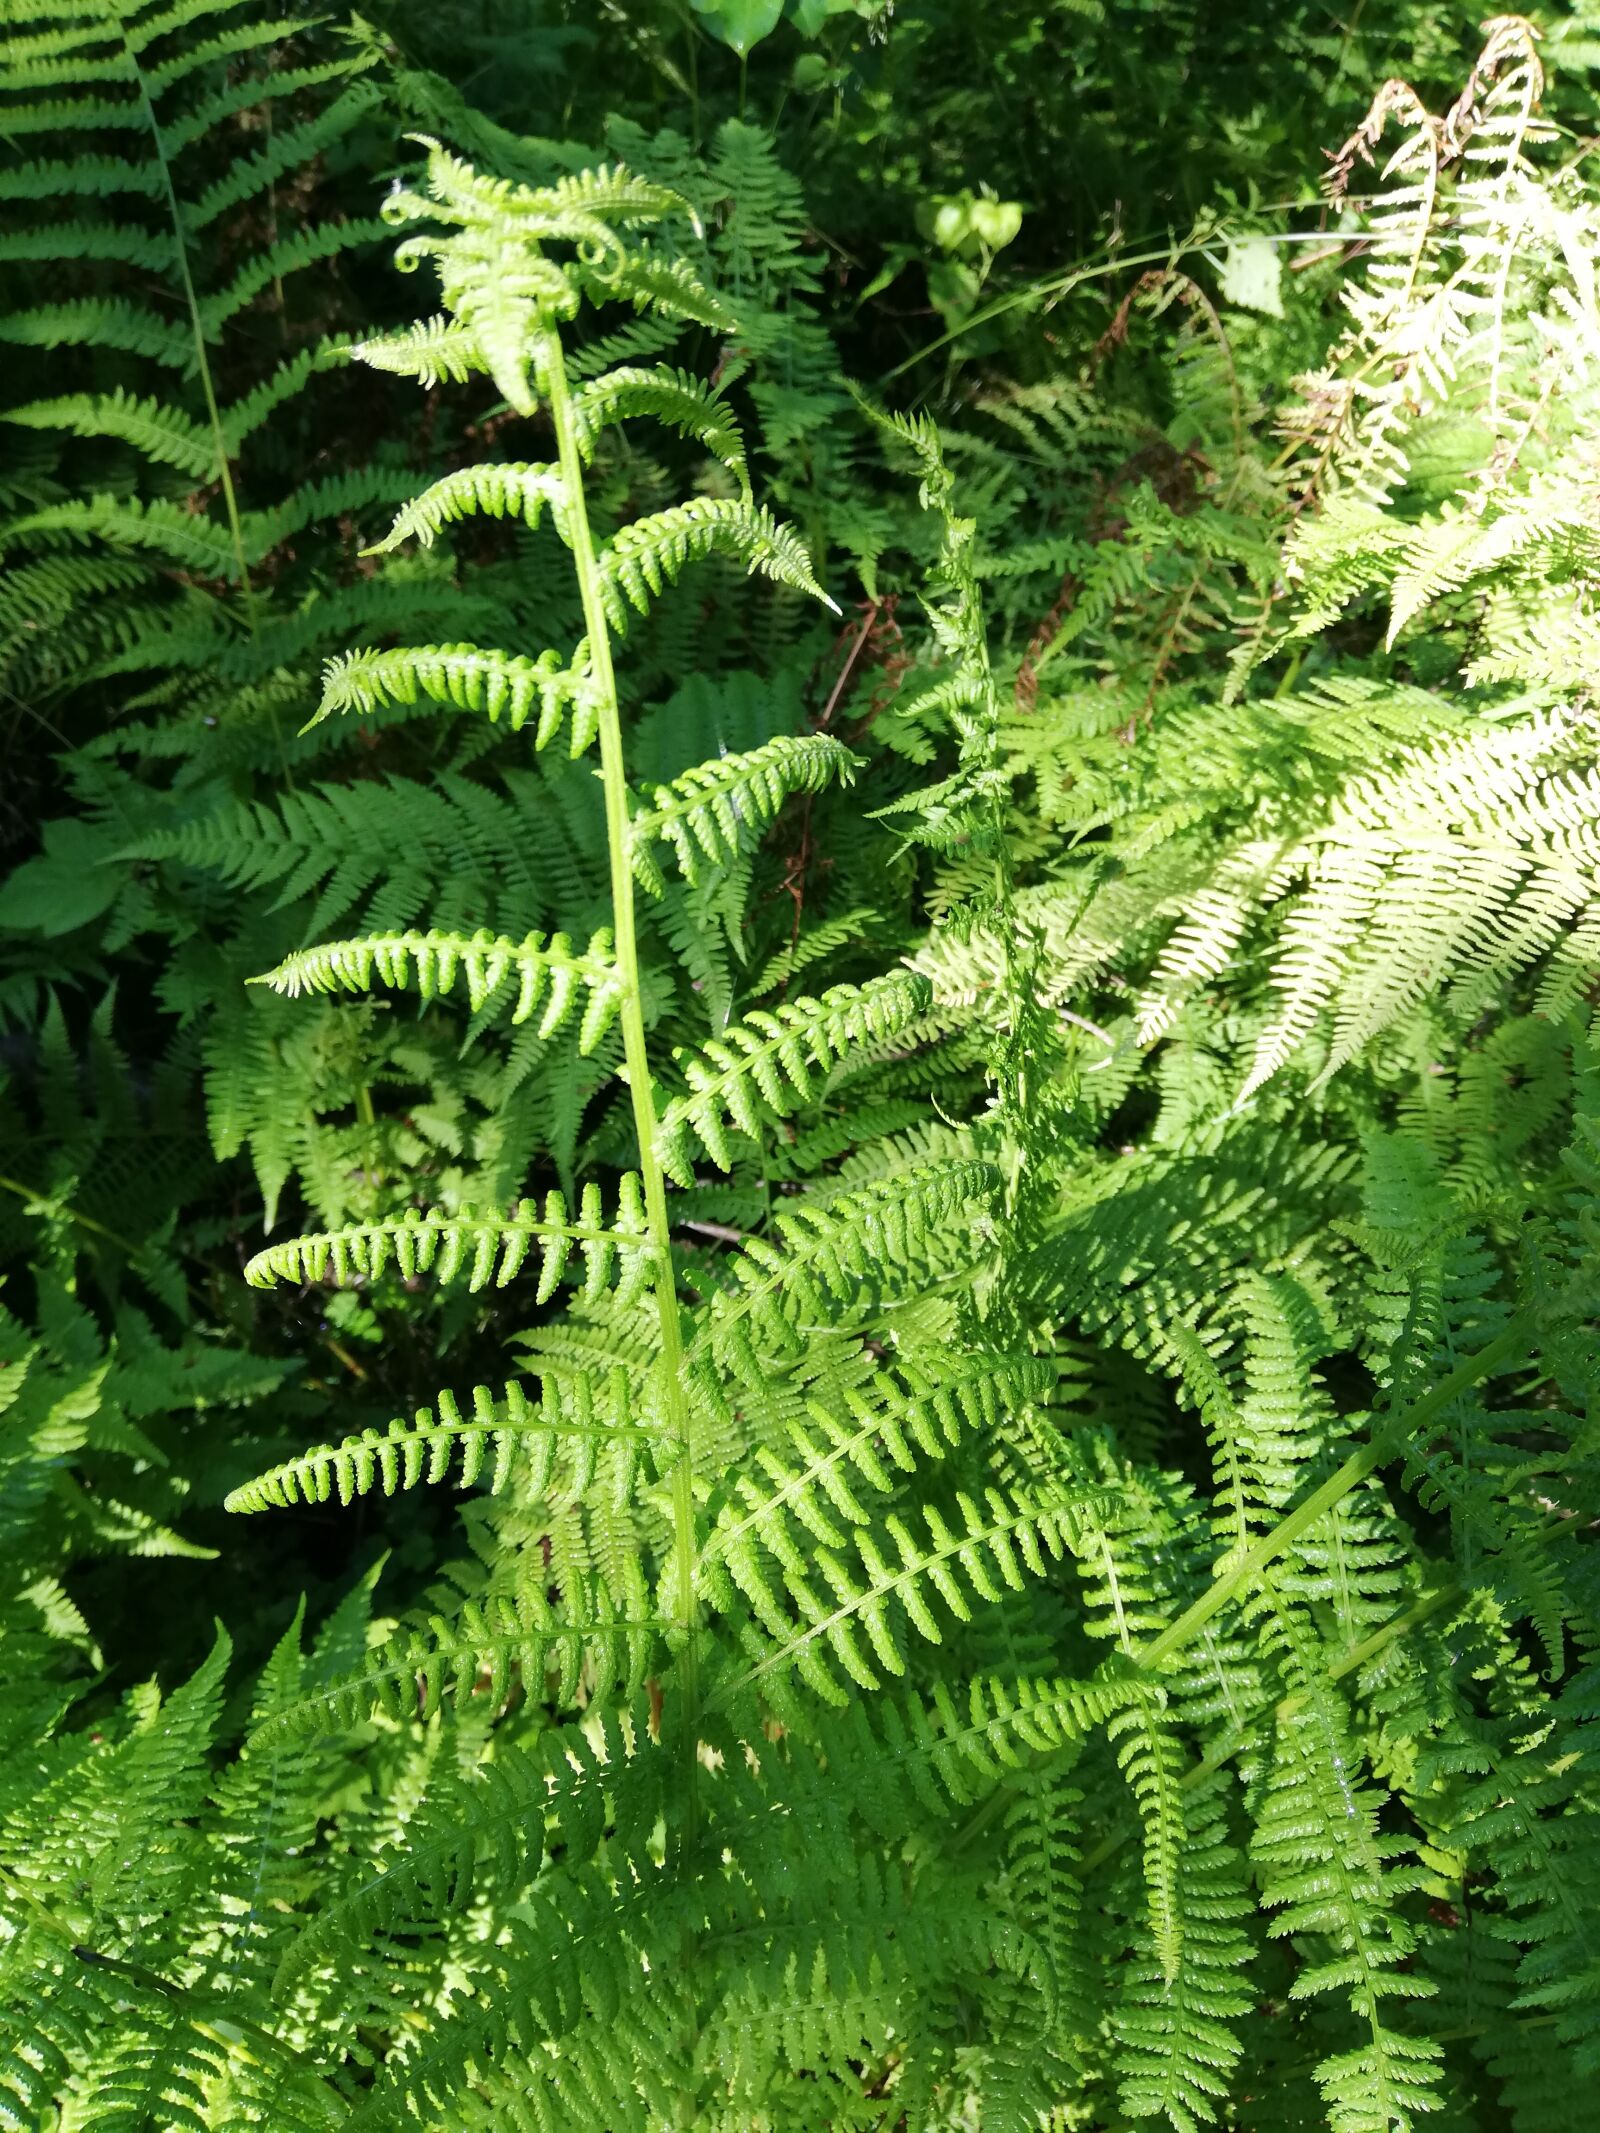 HUAWEI P20 lite sample photo. Fern, forest, summer photography